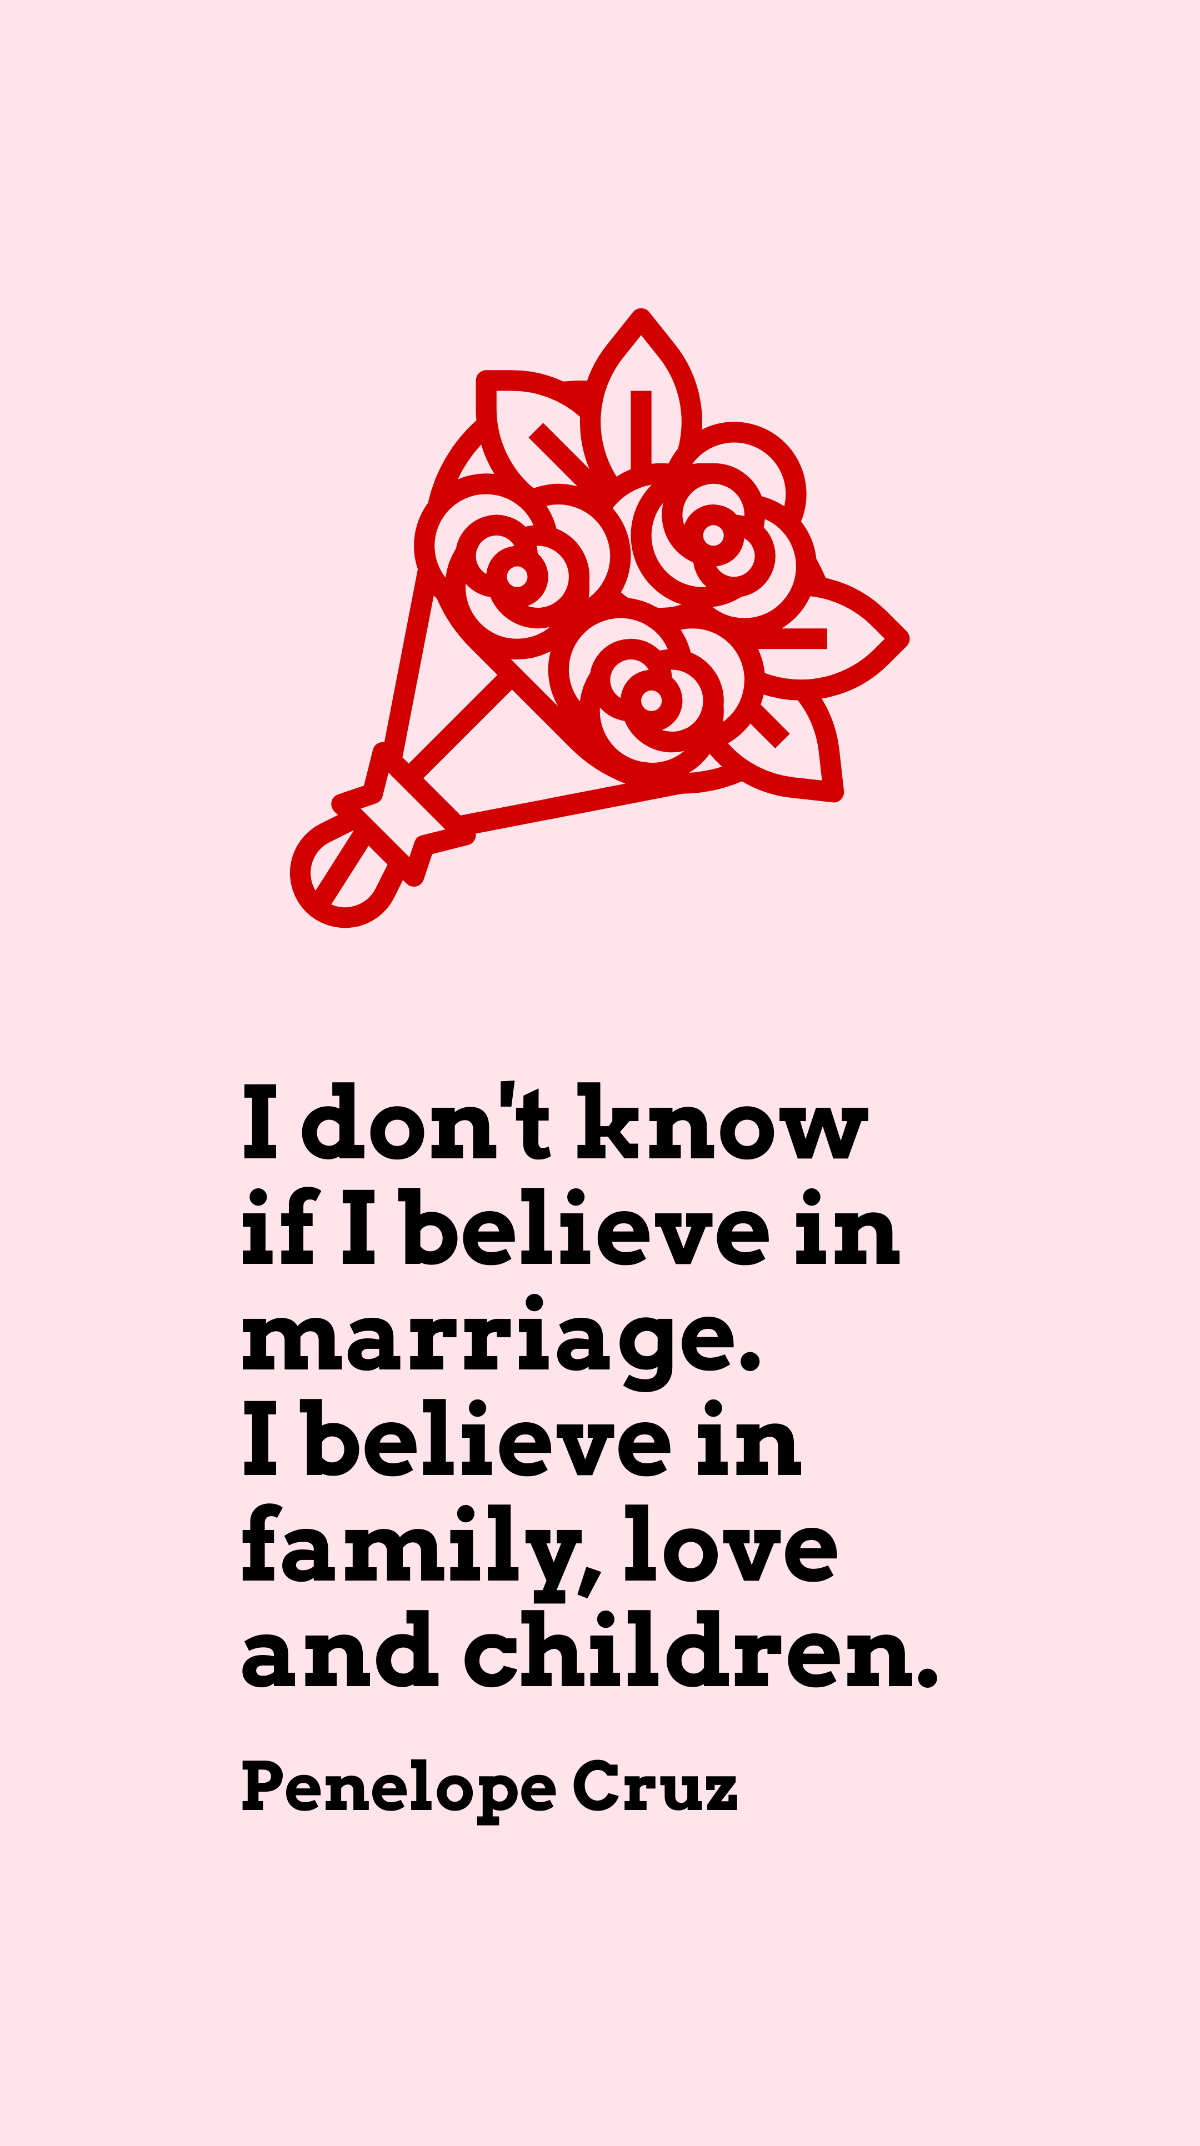 Free Penelope Cruz - I don't know if I believe in marriage. I believe in family, love and children. Template